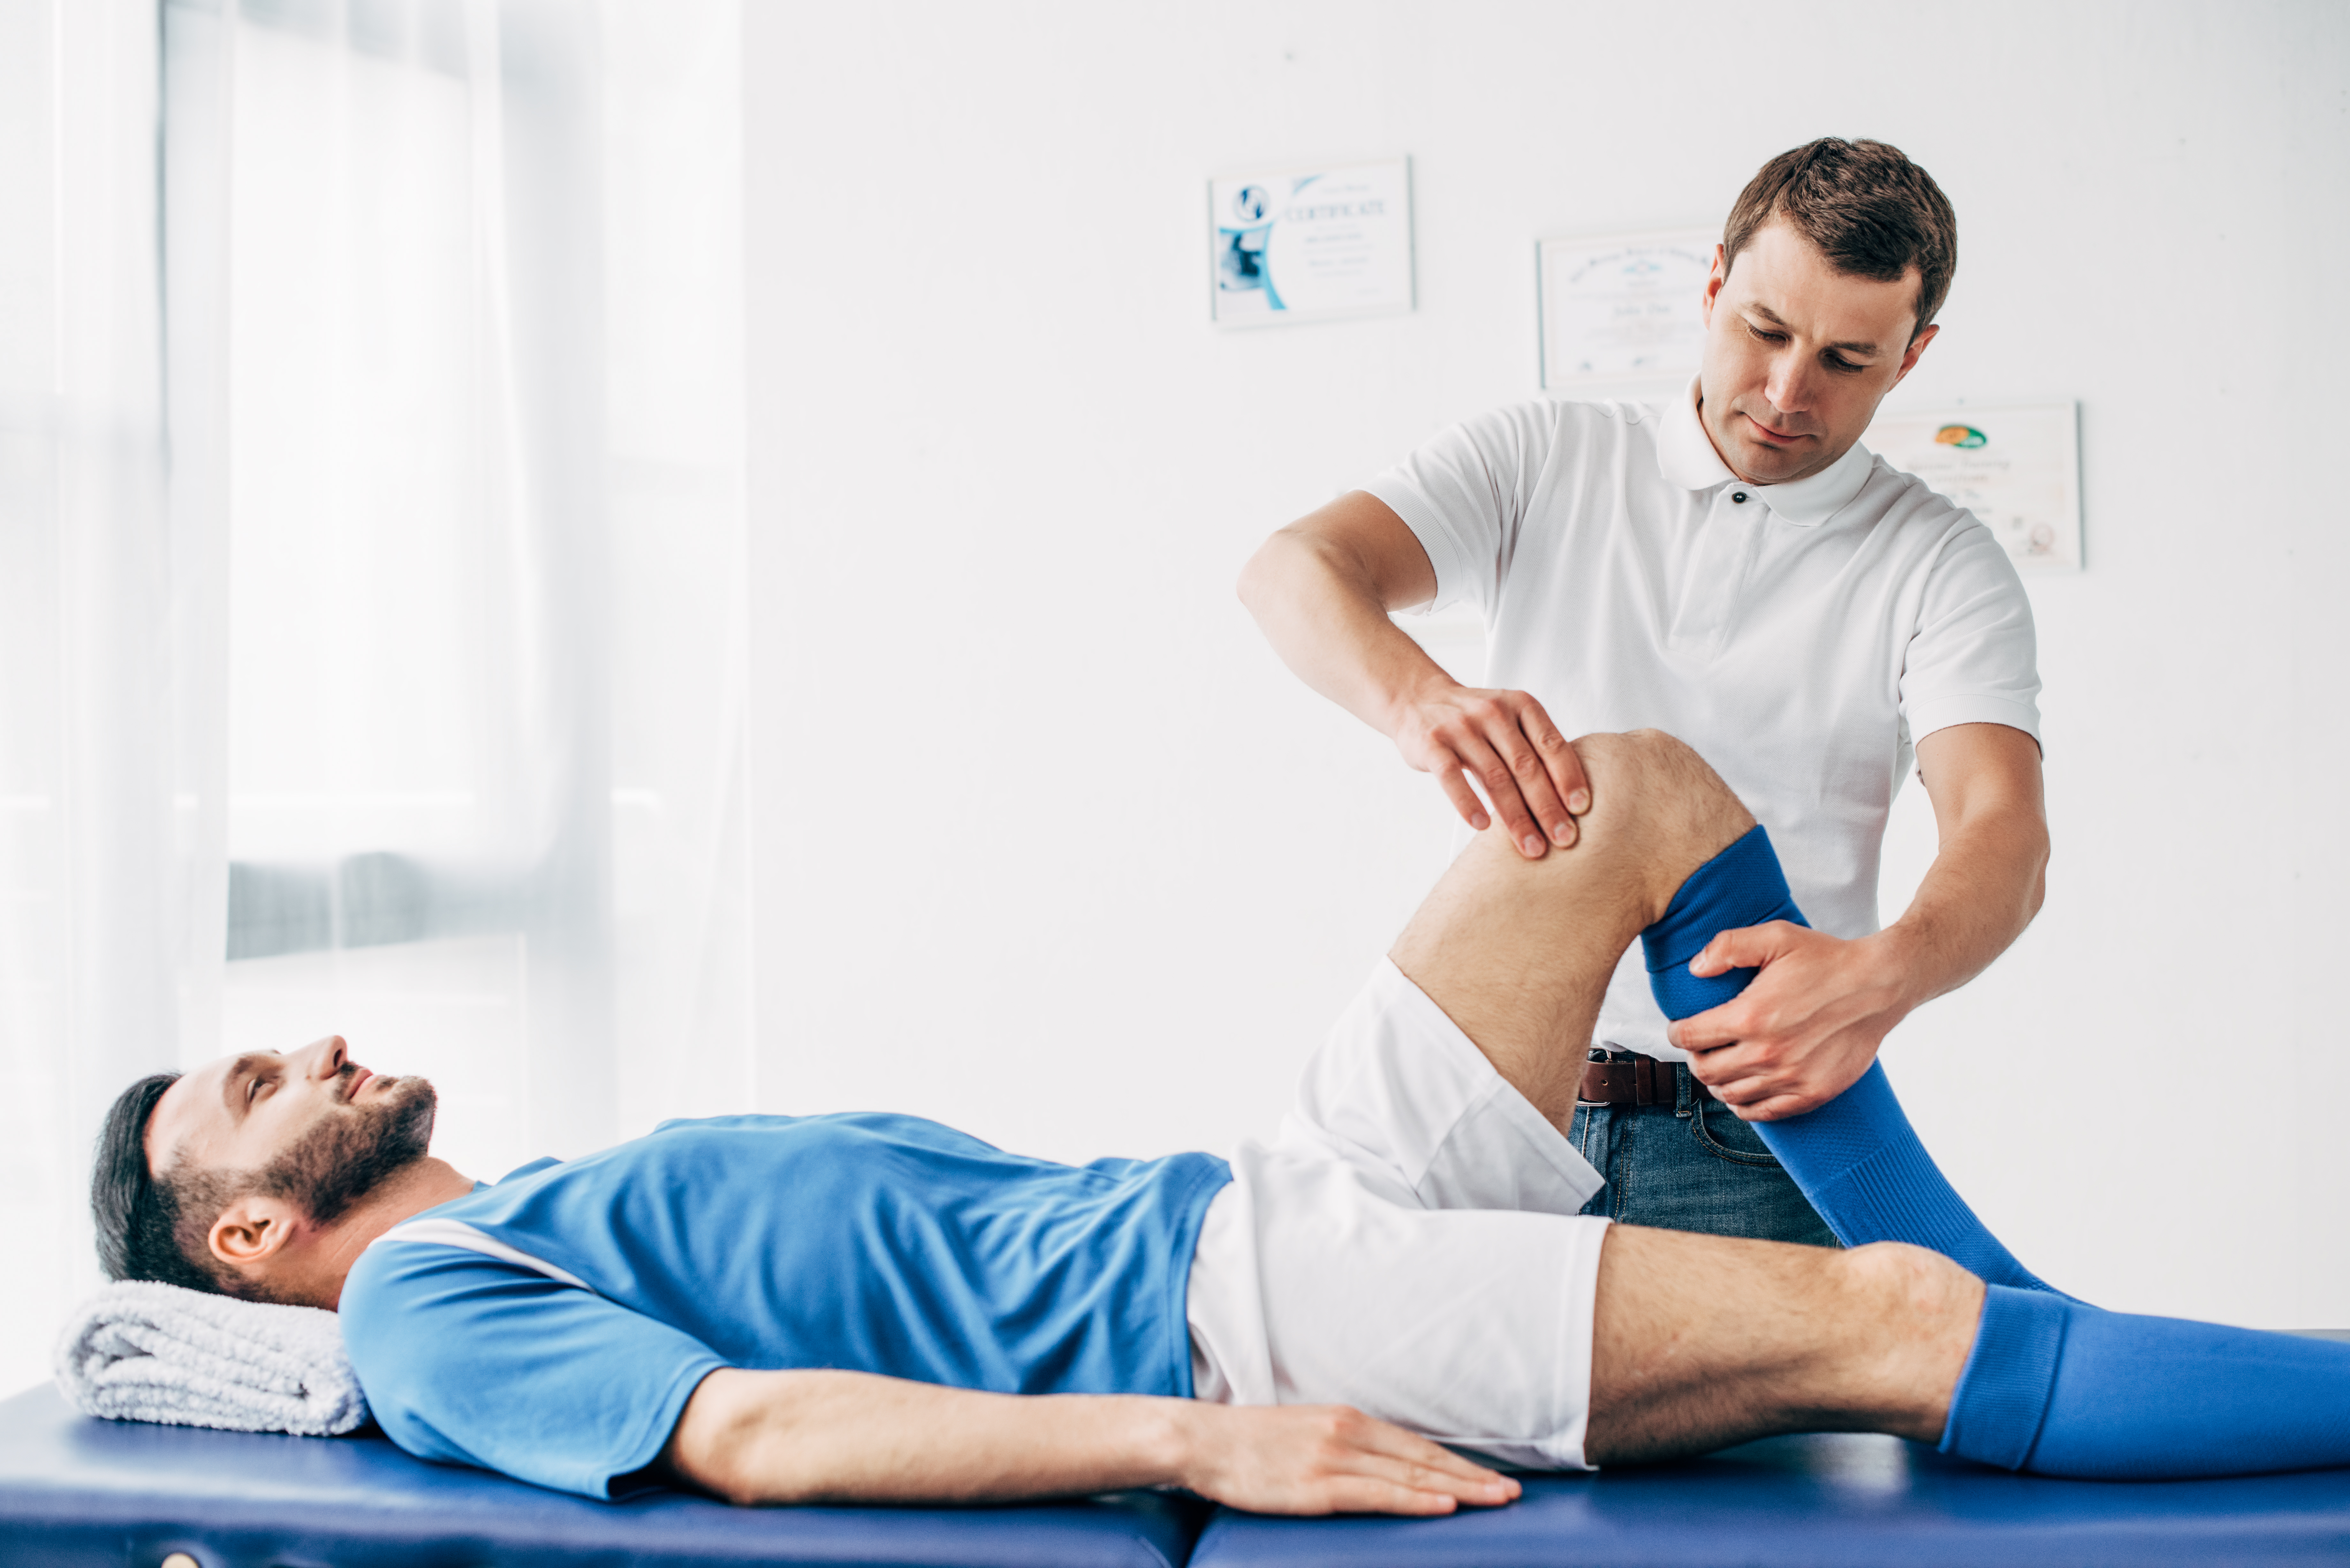 sports chiropractic care and recovery